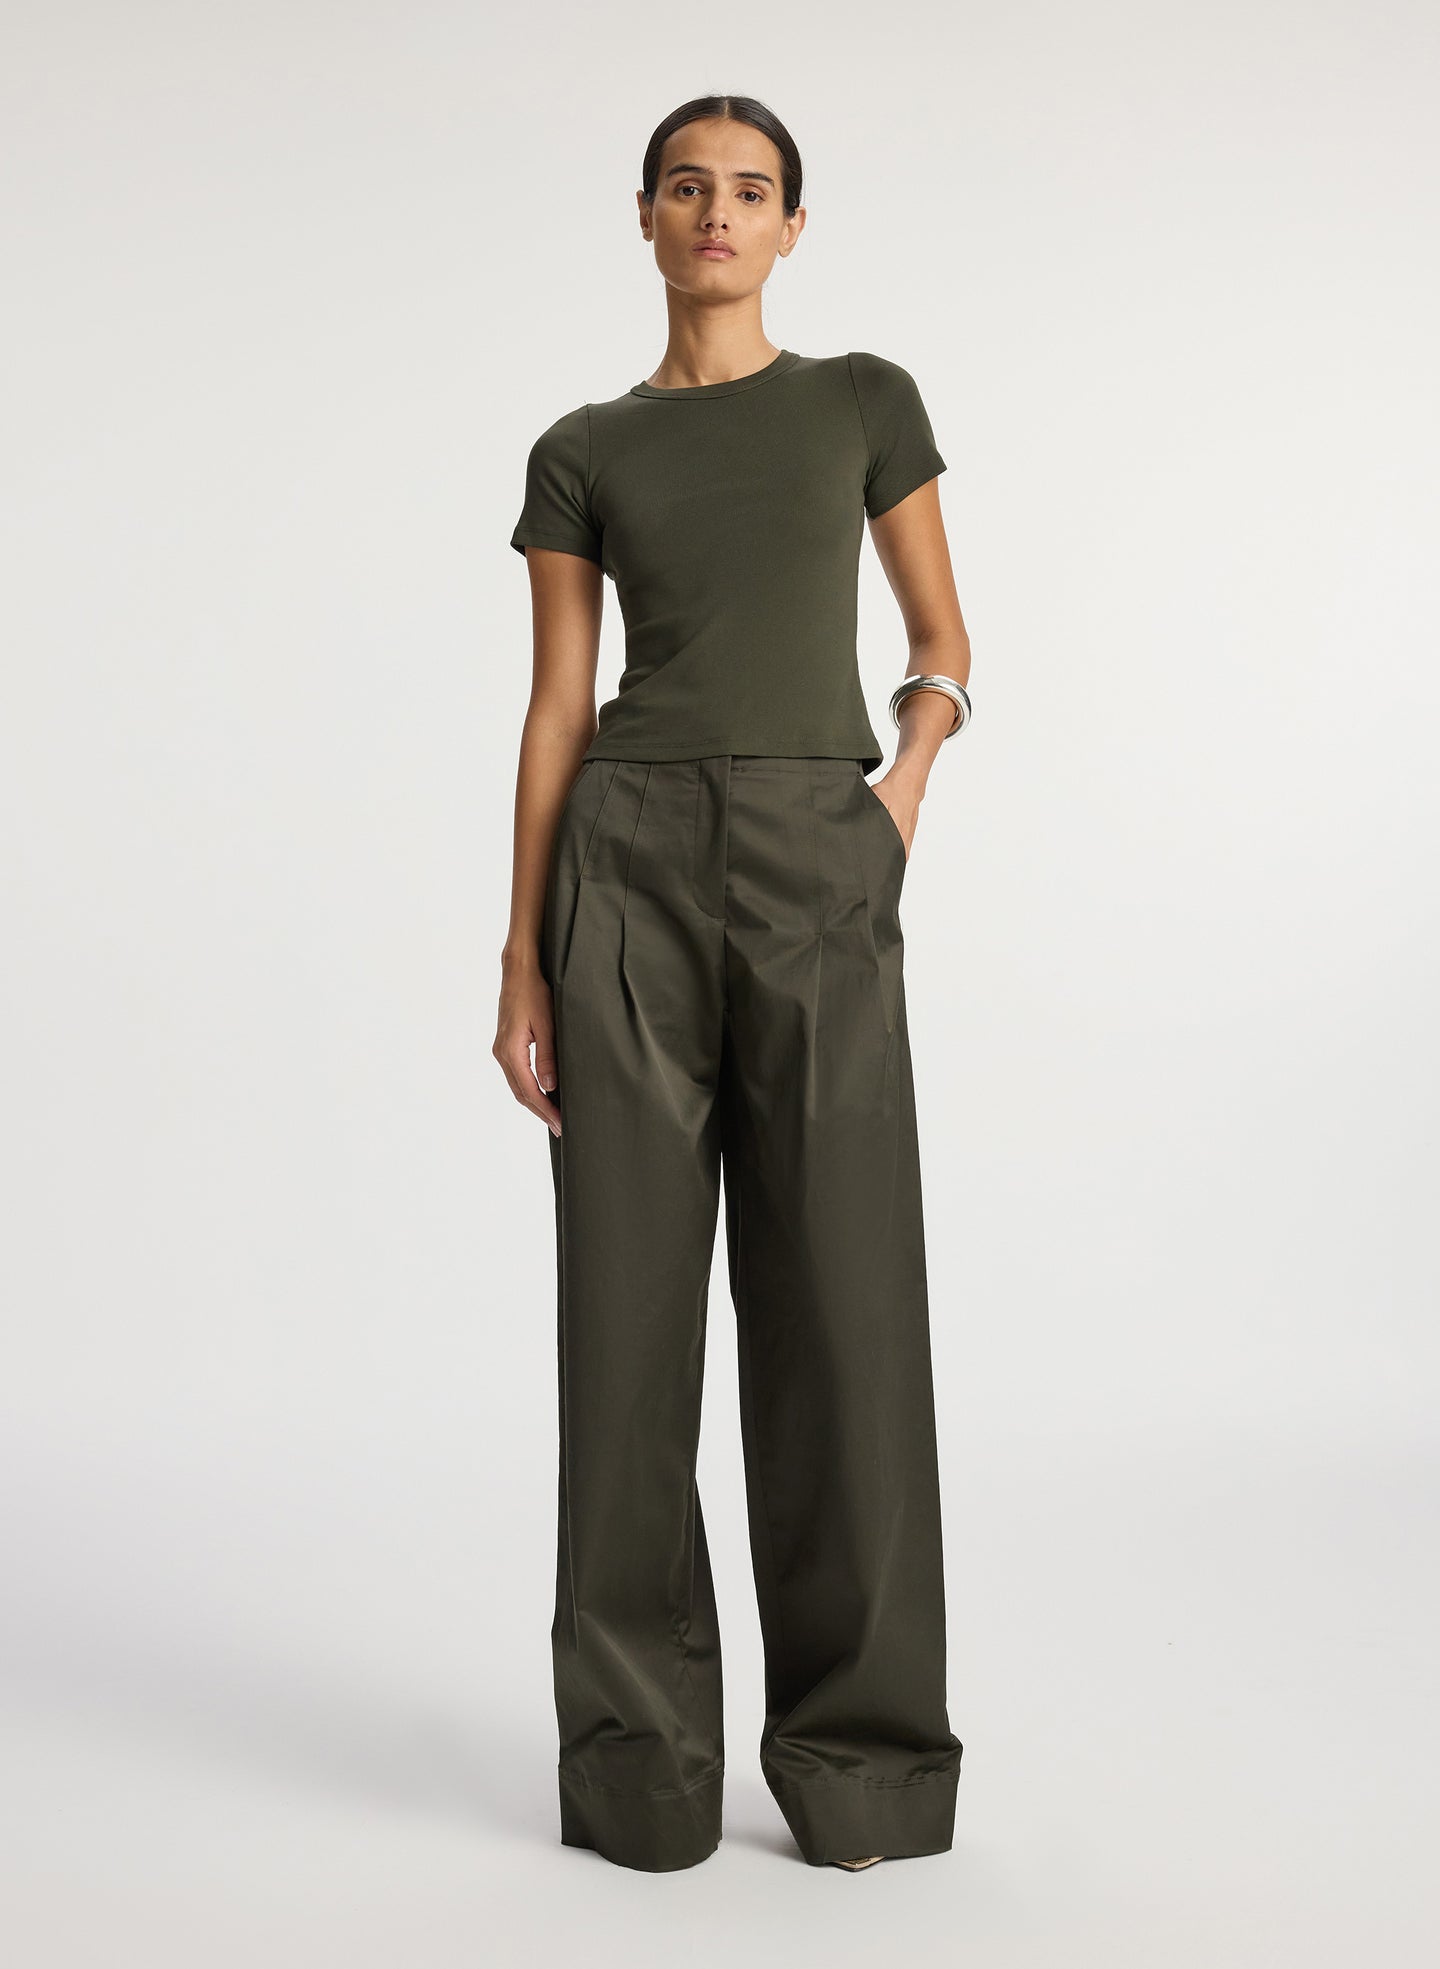 front view of woman wearing olive green tshirt and olive green wide leg pants